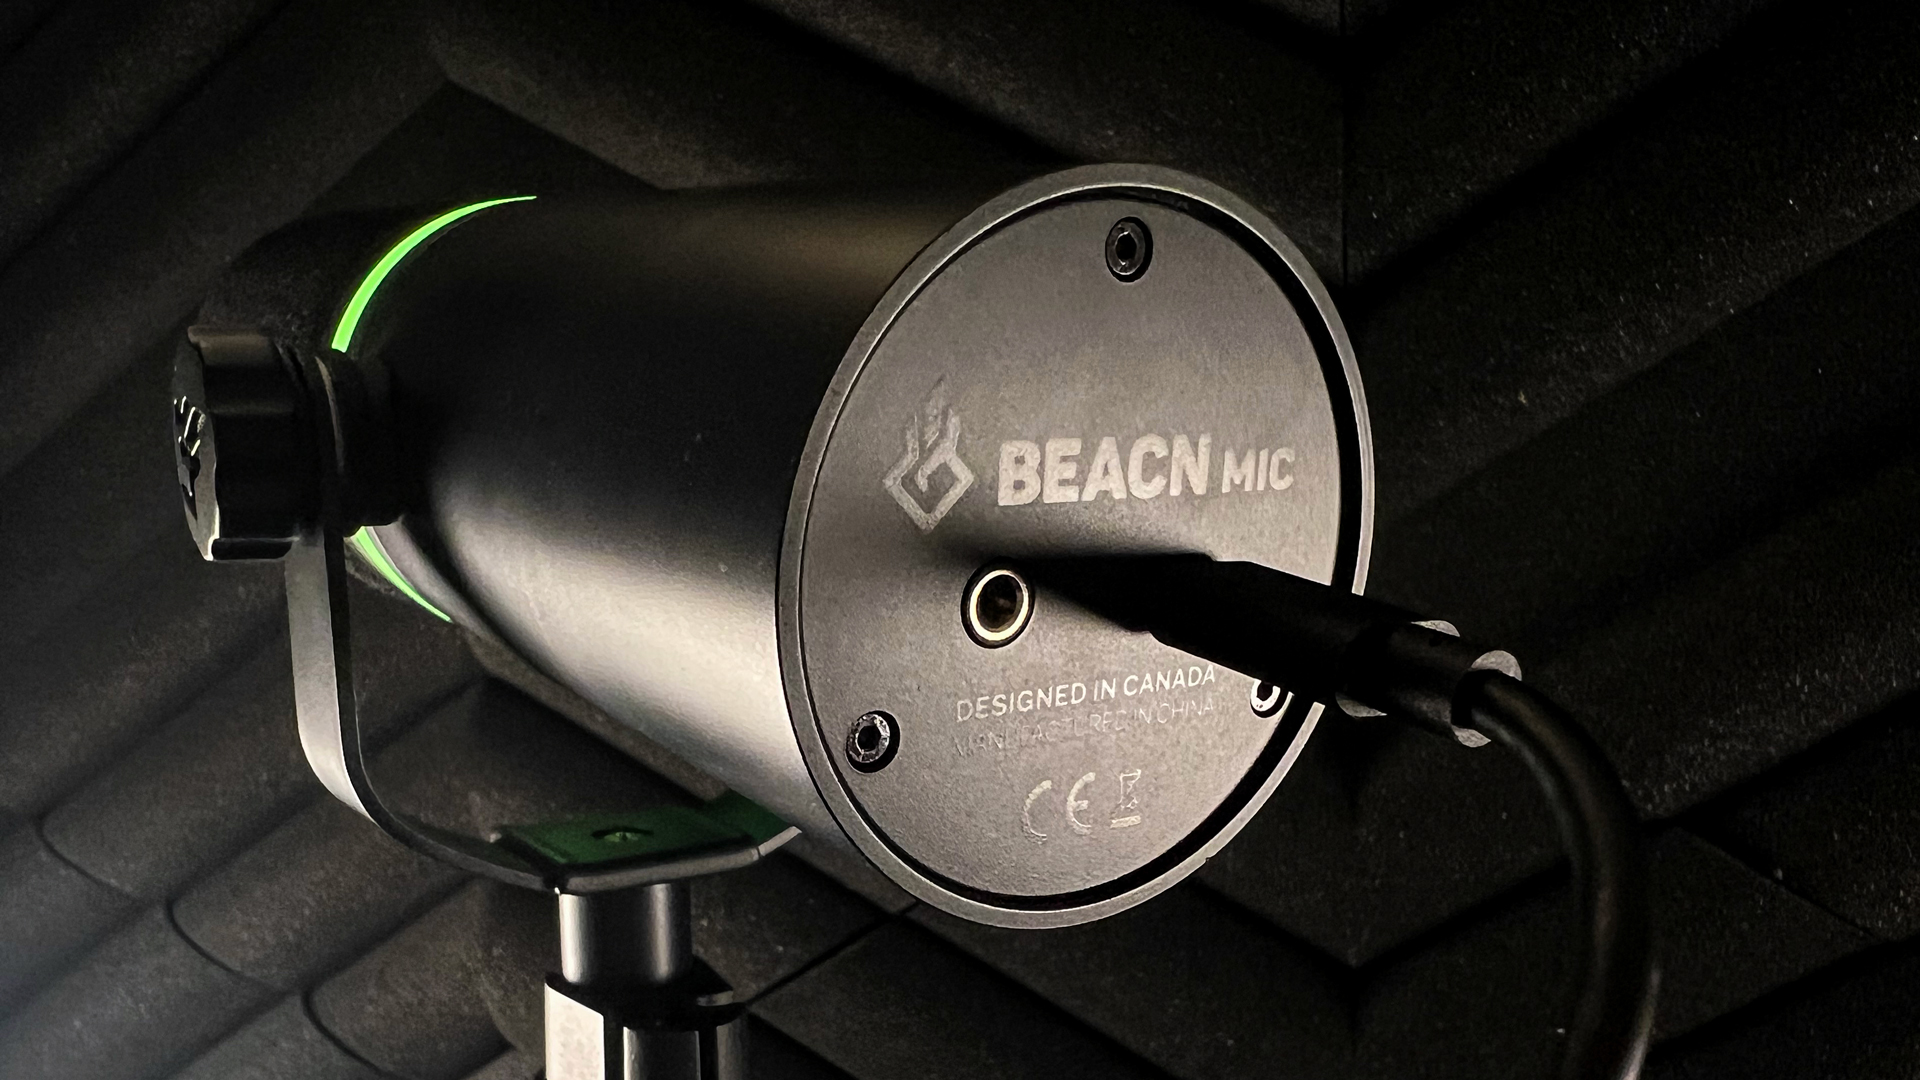 BEACN Mic's bottom, showing the brand logo, USB-C connection, and audio jack